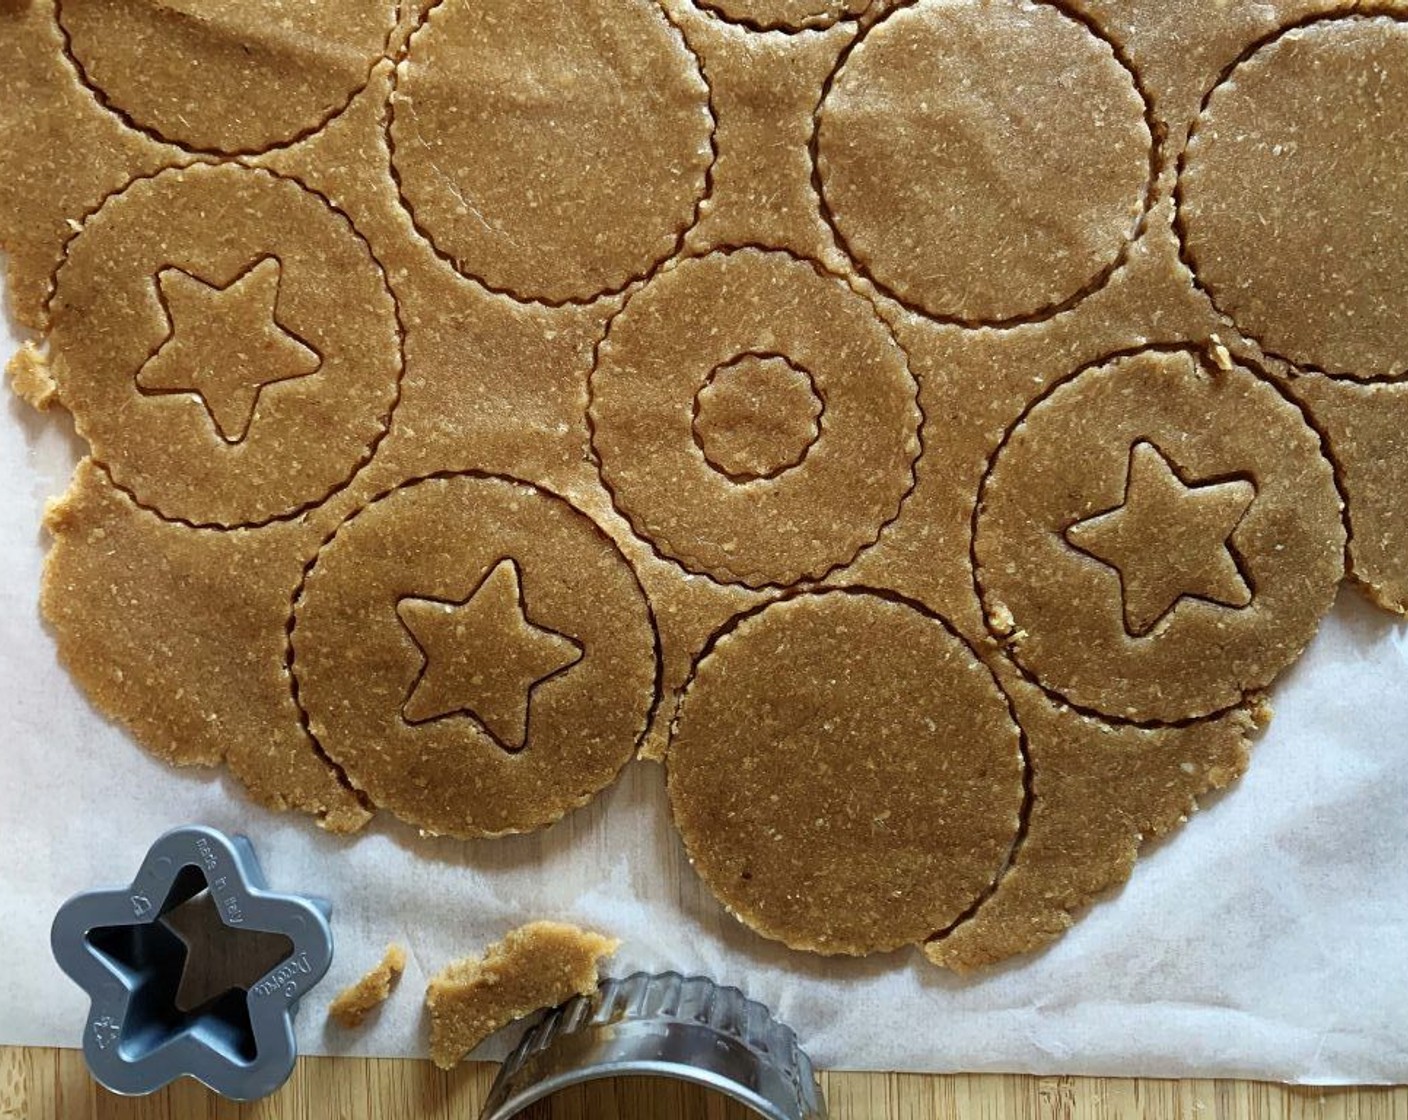 step 5 Using round cookie cutters, cut out about 20 circles. In 10 of them make an additional central hole using a smaller cutter. Refrigerate 30 minutes. The cookies are very soft so handle them carefully to avoid them breaking.